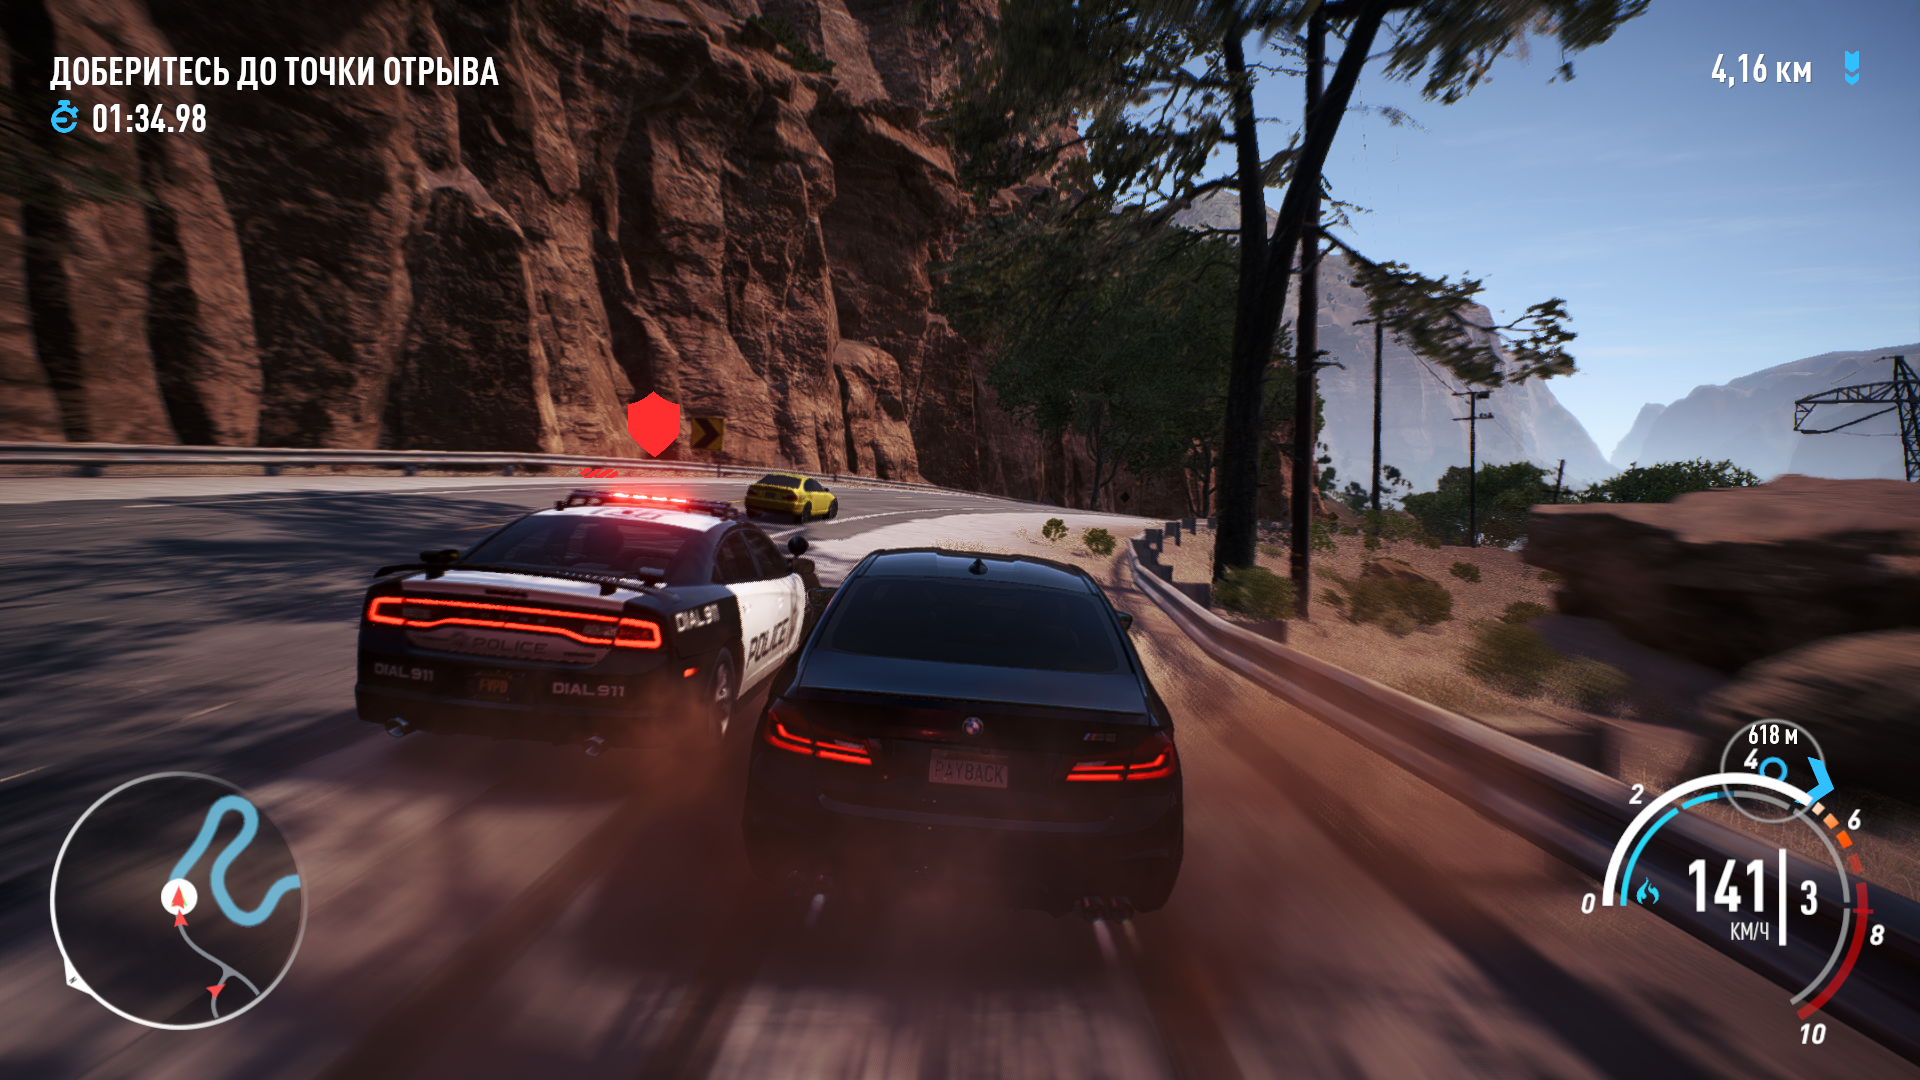 Need for Speed (ps4). Need for Speed PLAYSTATION 4. Need for Speed на пс4. Need for Speed игры ps4. Нид фор спид пс